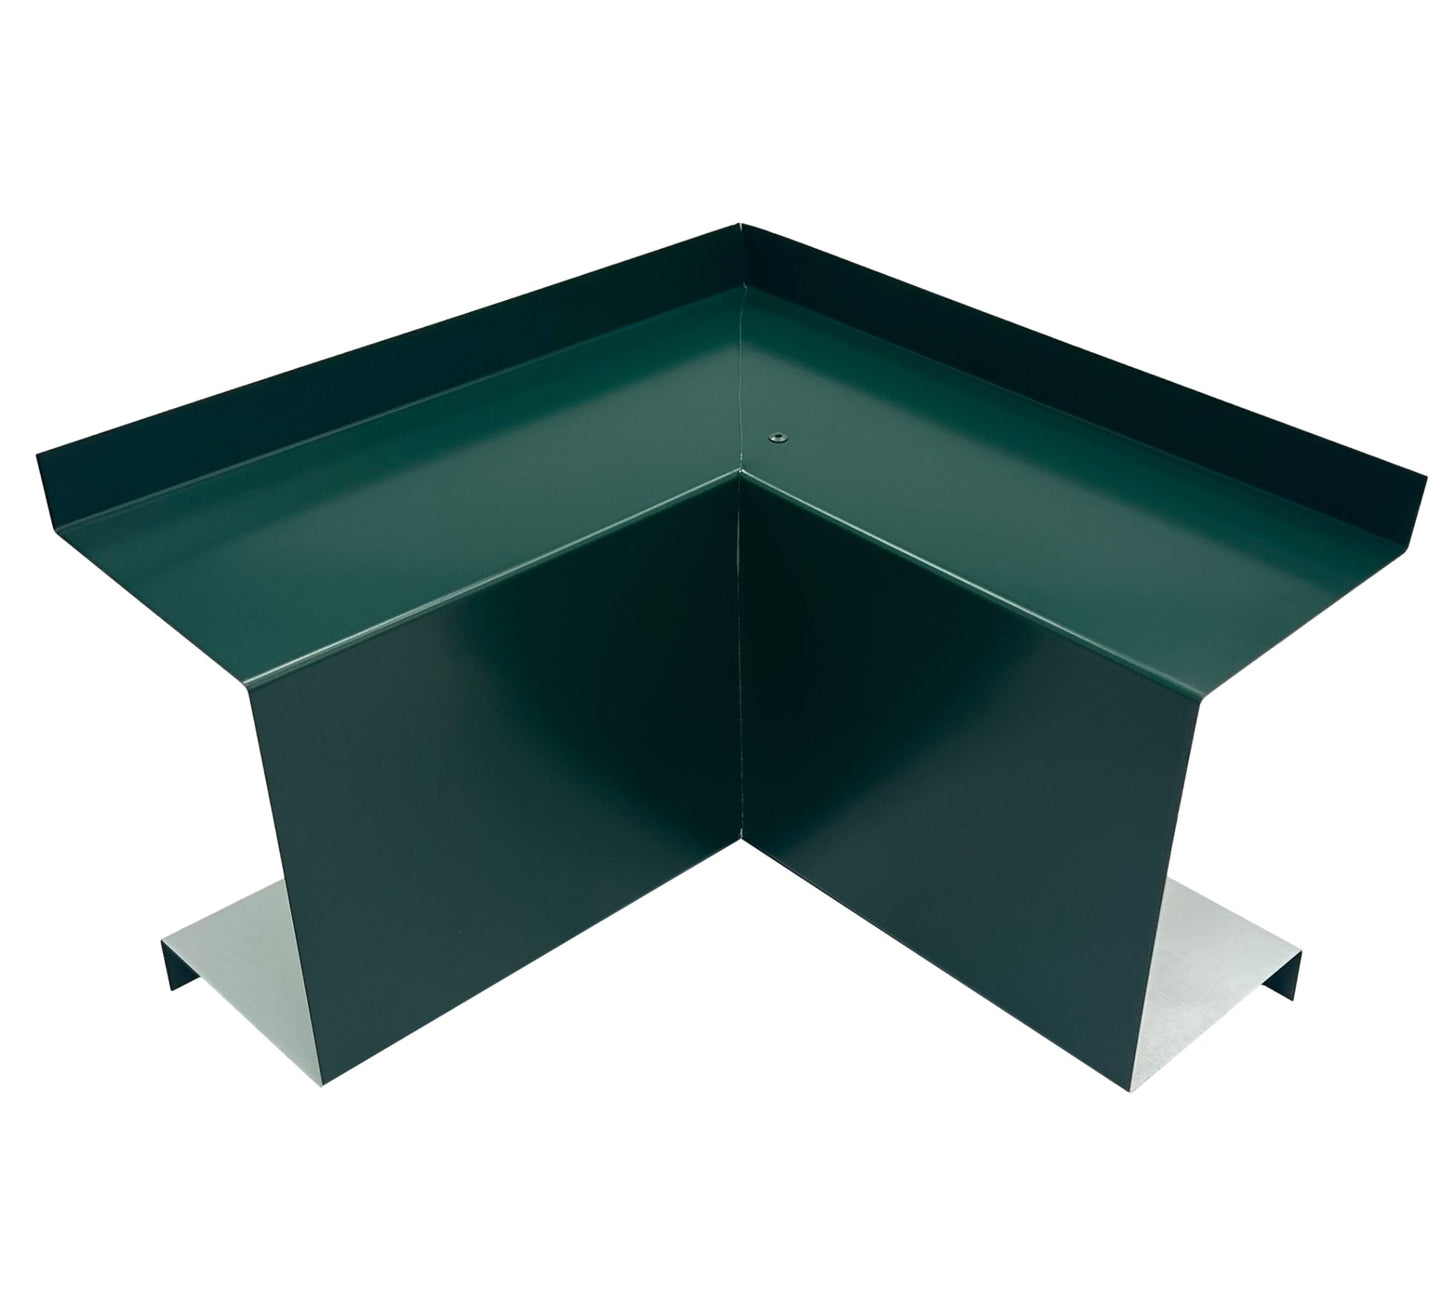 A green metal corner flashing piece with a 90-degree bend, designed for roofing, HVAC installations, or siding applications. The Perma Cover Residential Series - Line Set Cover Inside Corner Elbows - Premium Quality has a sleek, smooth surface and is placed upright against a white background.